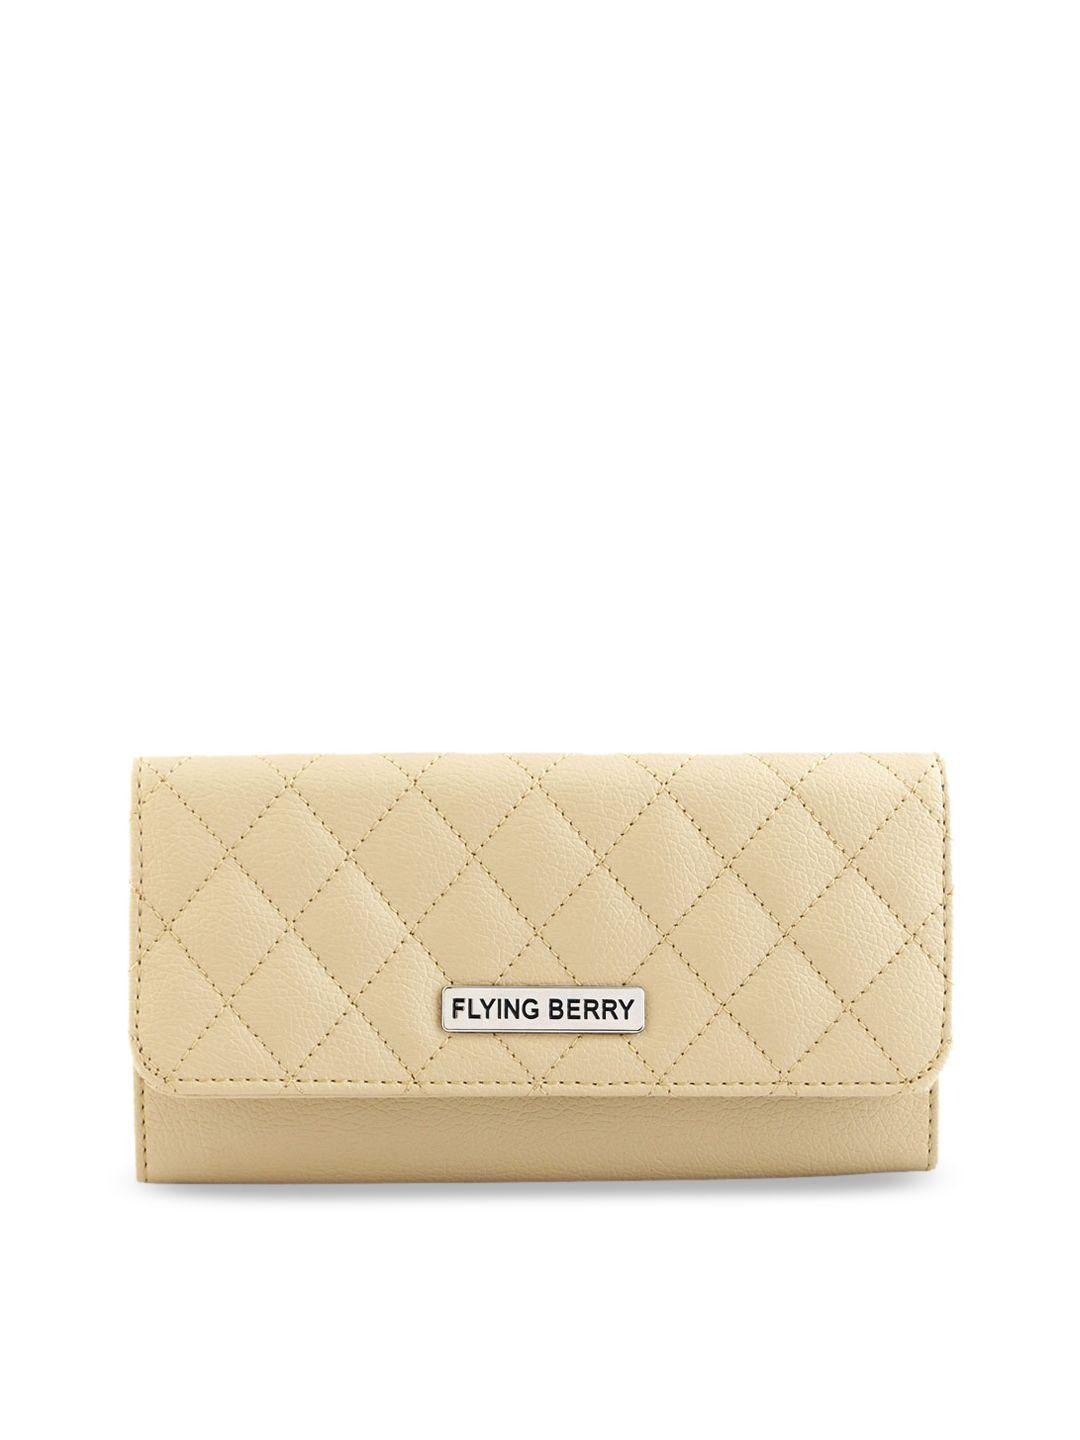 flying berry beige solid purse clutch